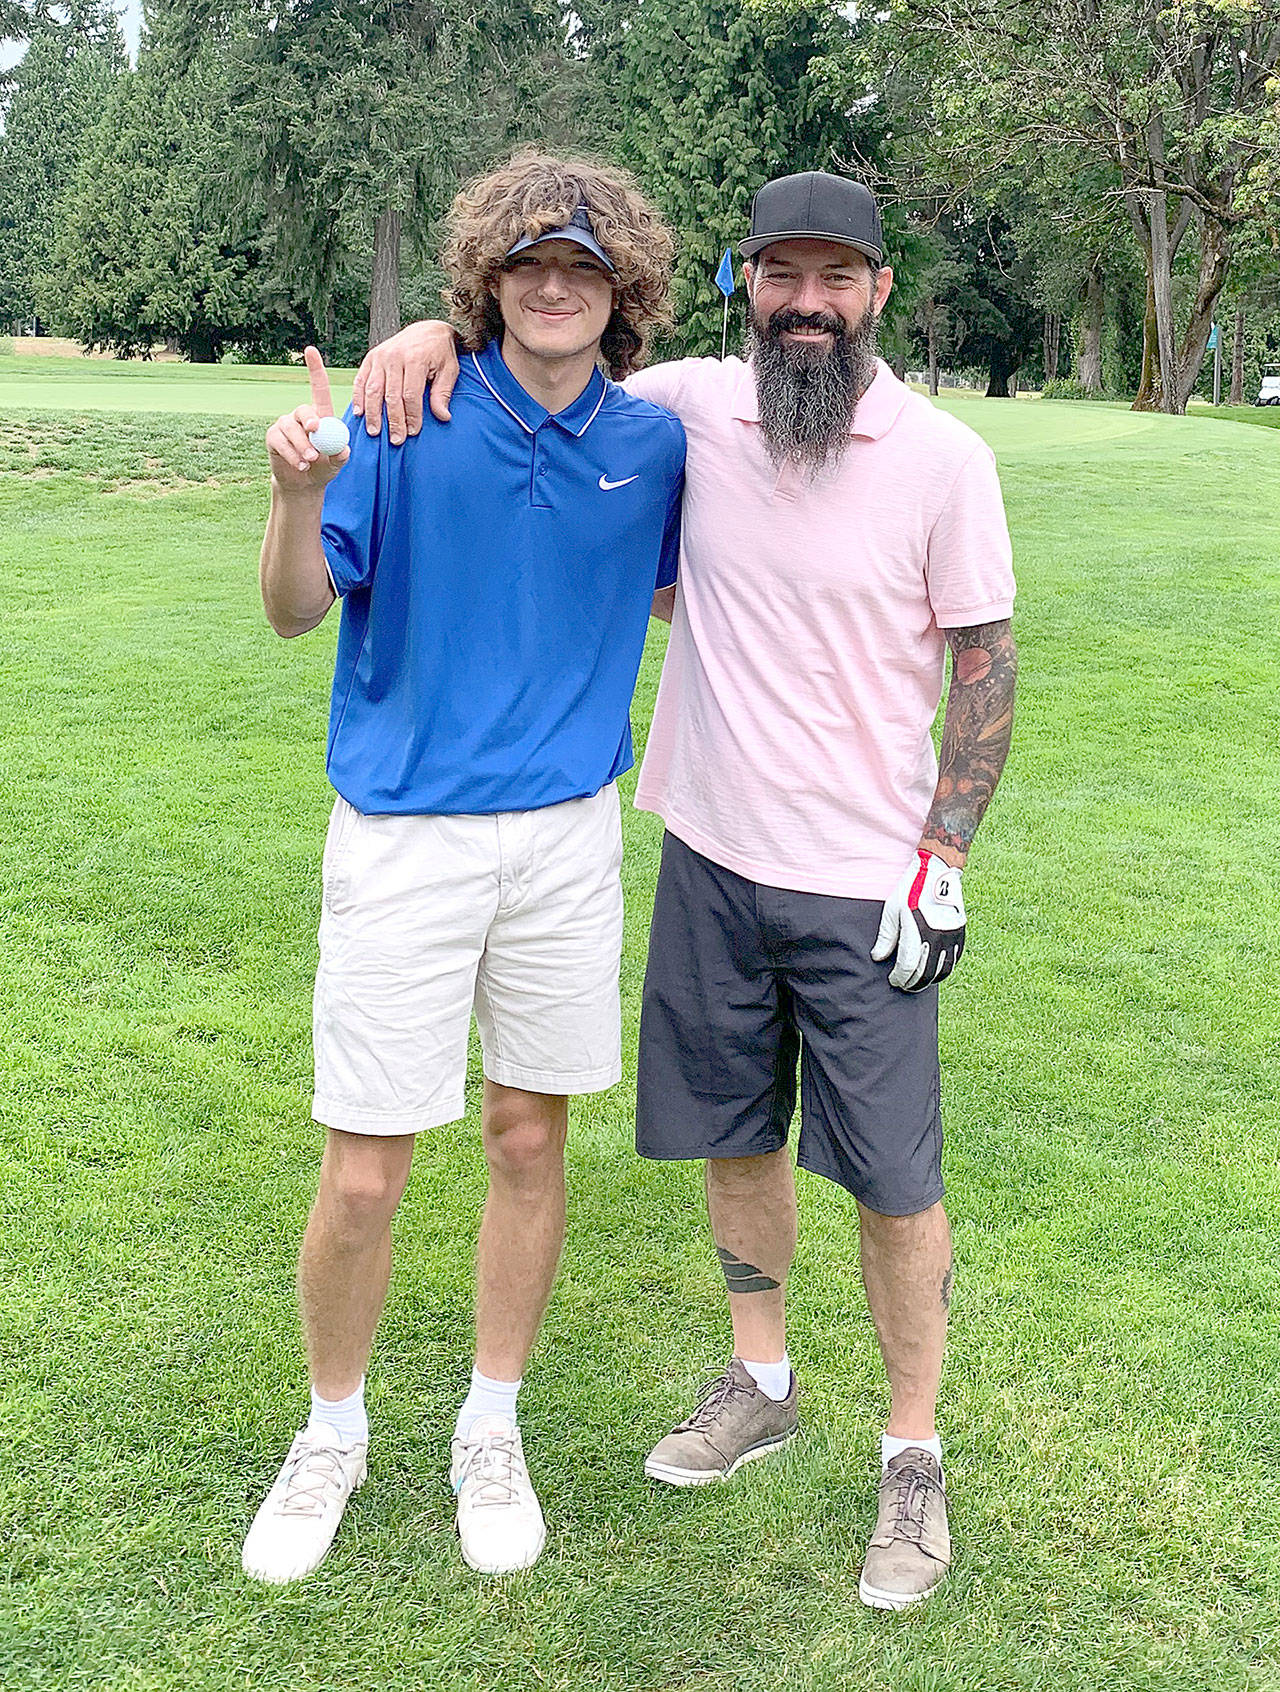 Port Angeles’ Edun Bailey, left, celebrates his hole in one with his father Matt Bailey during the Bellevue Amateur tournament this weekend at the Bellevue Golf Course. (Photo courtesy of Matt Bailey)